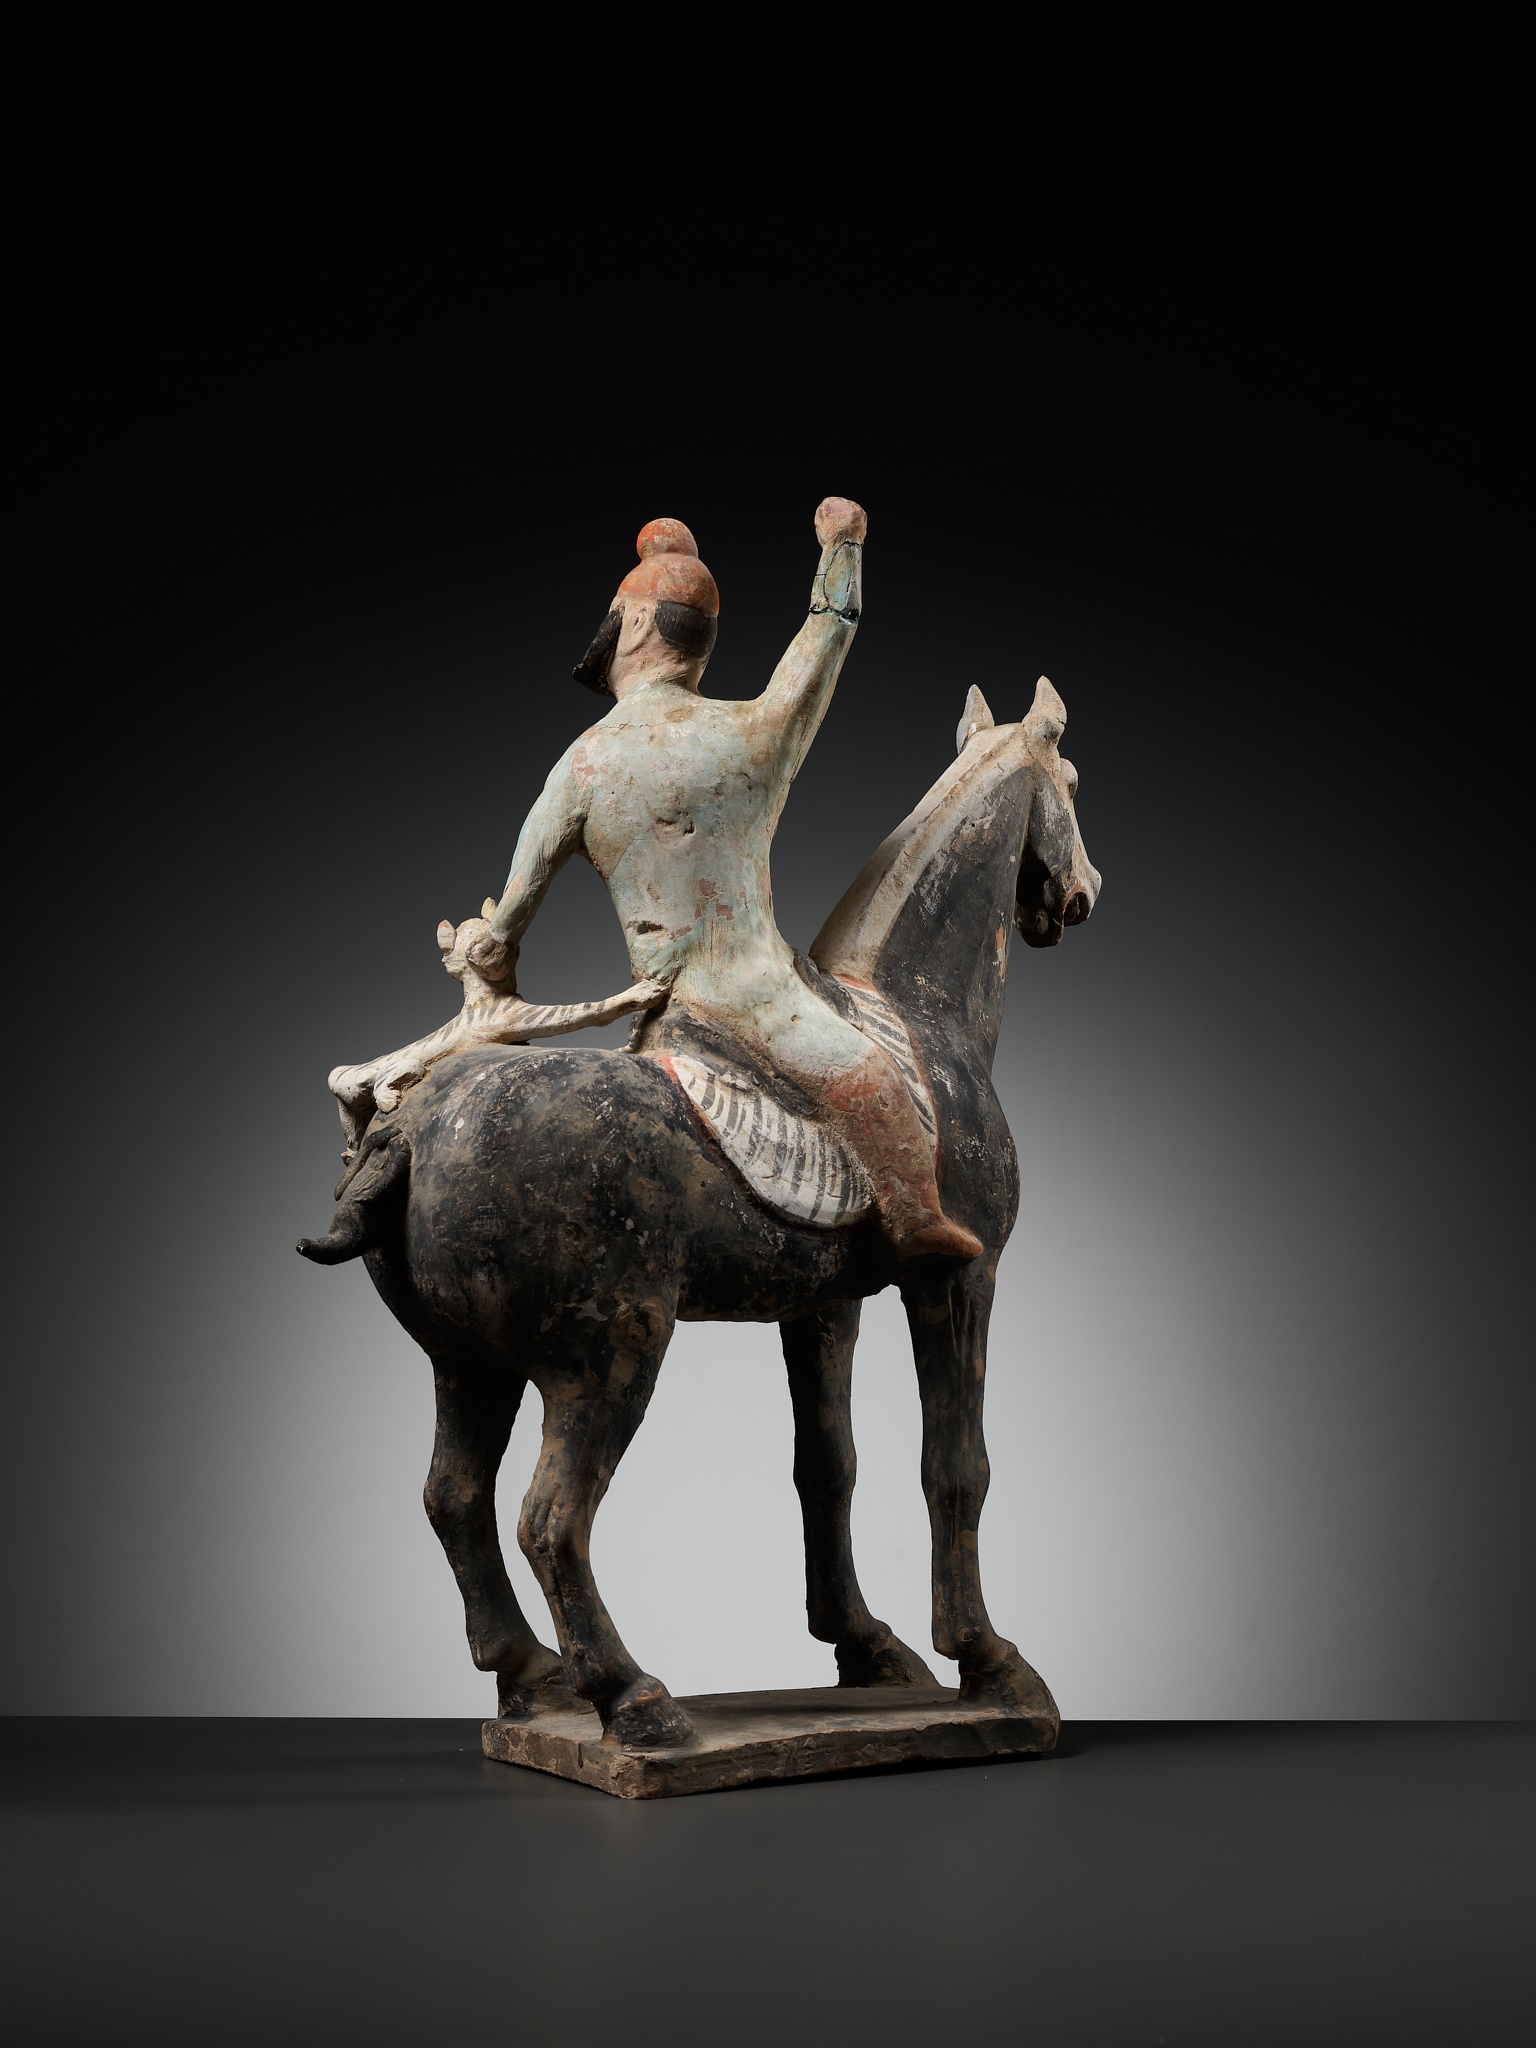 A RARE PAINTED POTTERY HORSE WITH A 'PHRYGIAN' RIDER AND TIGER CUB, TANG DYNASTY - Image 8 of 14